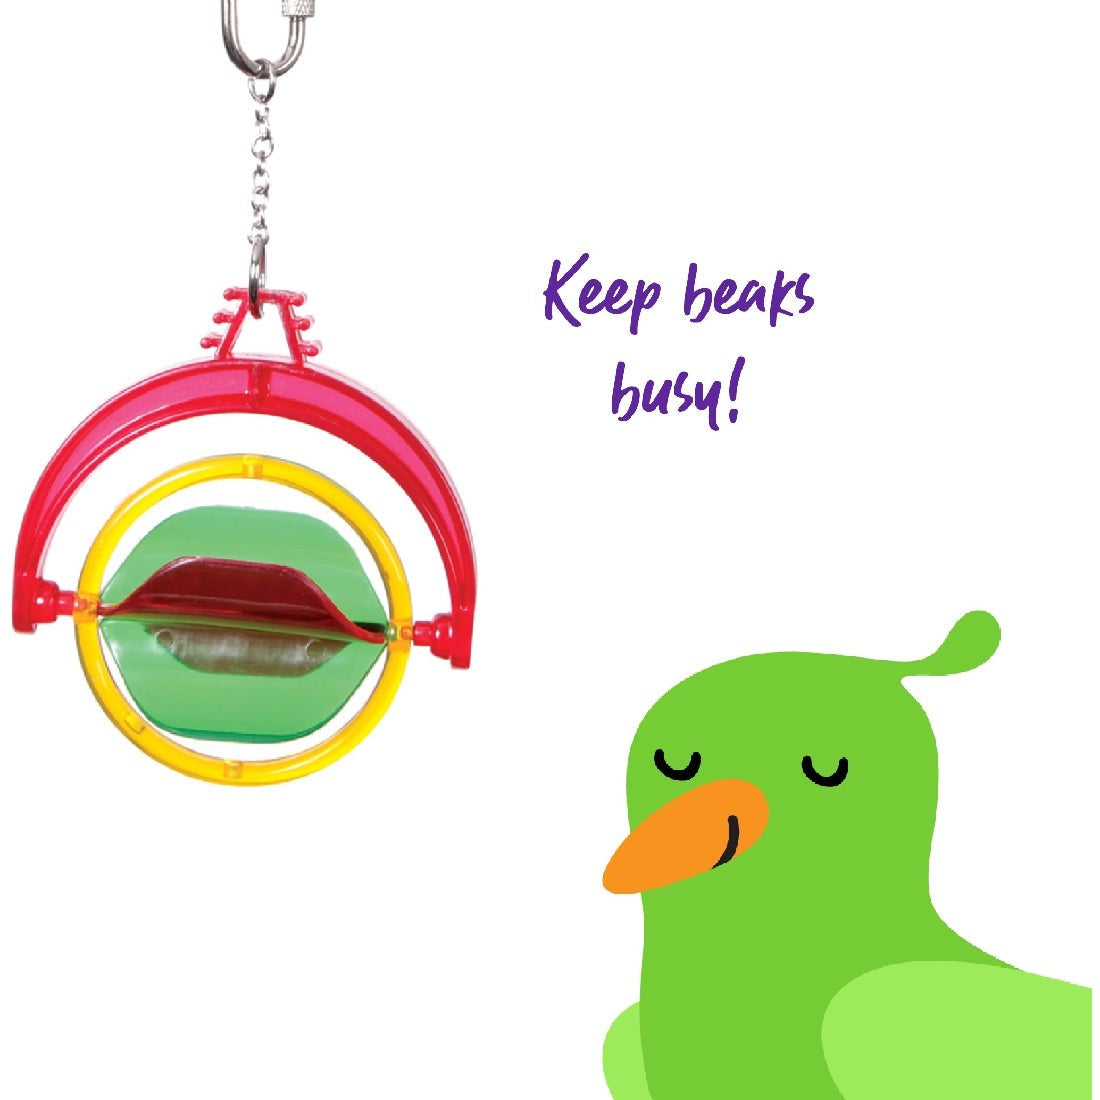 Colorful hanging bird toy with rings and a bell, white background.